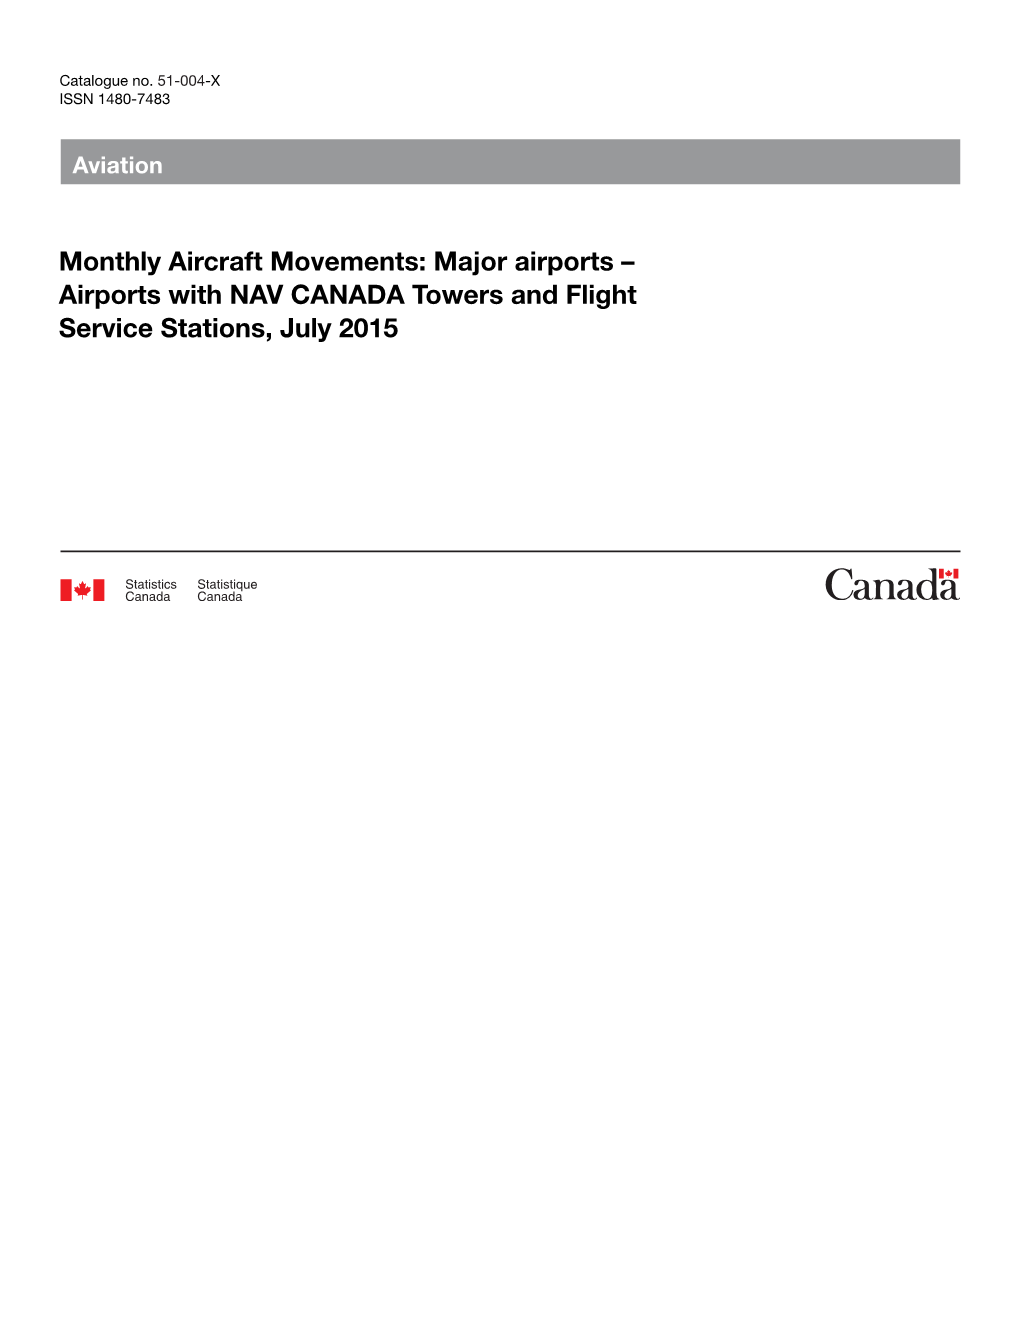 Monthly Aircraft Movements: Major Airports – Airports with NAV CANADA Towers and Flight Service Stations, July 2015